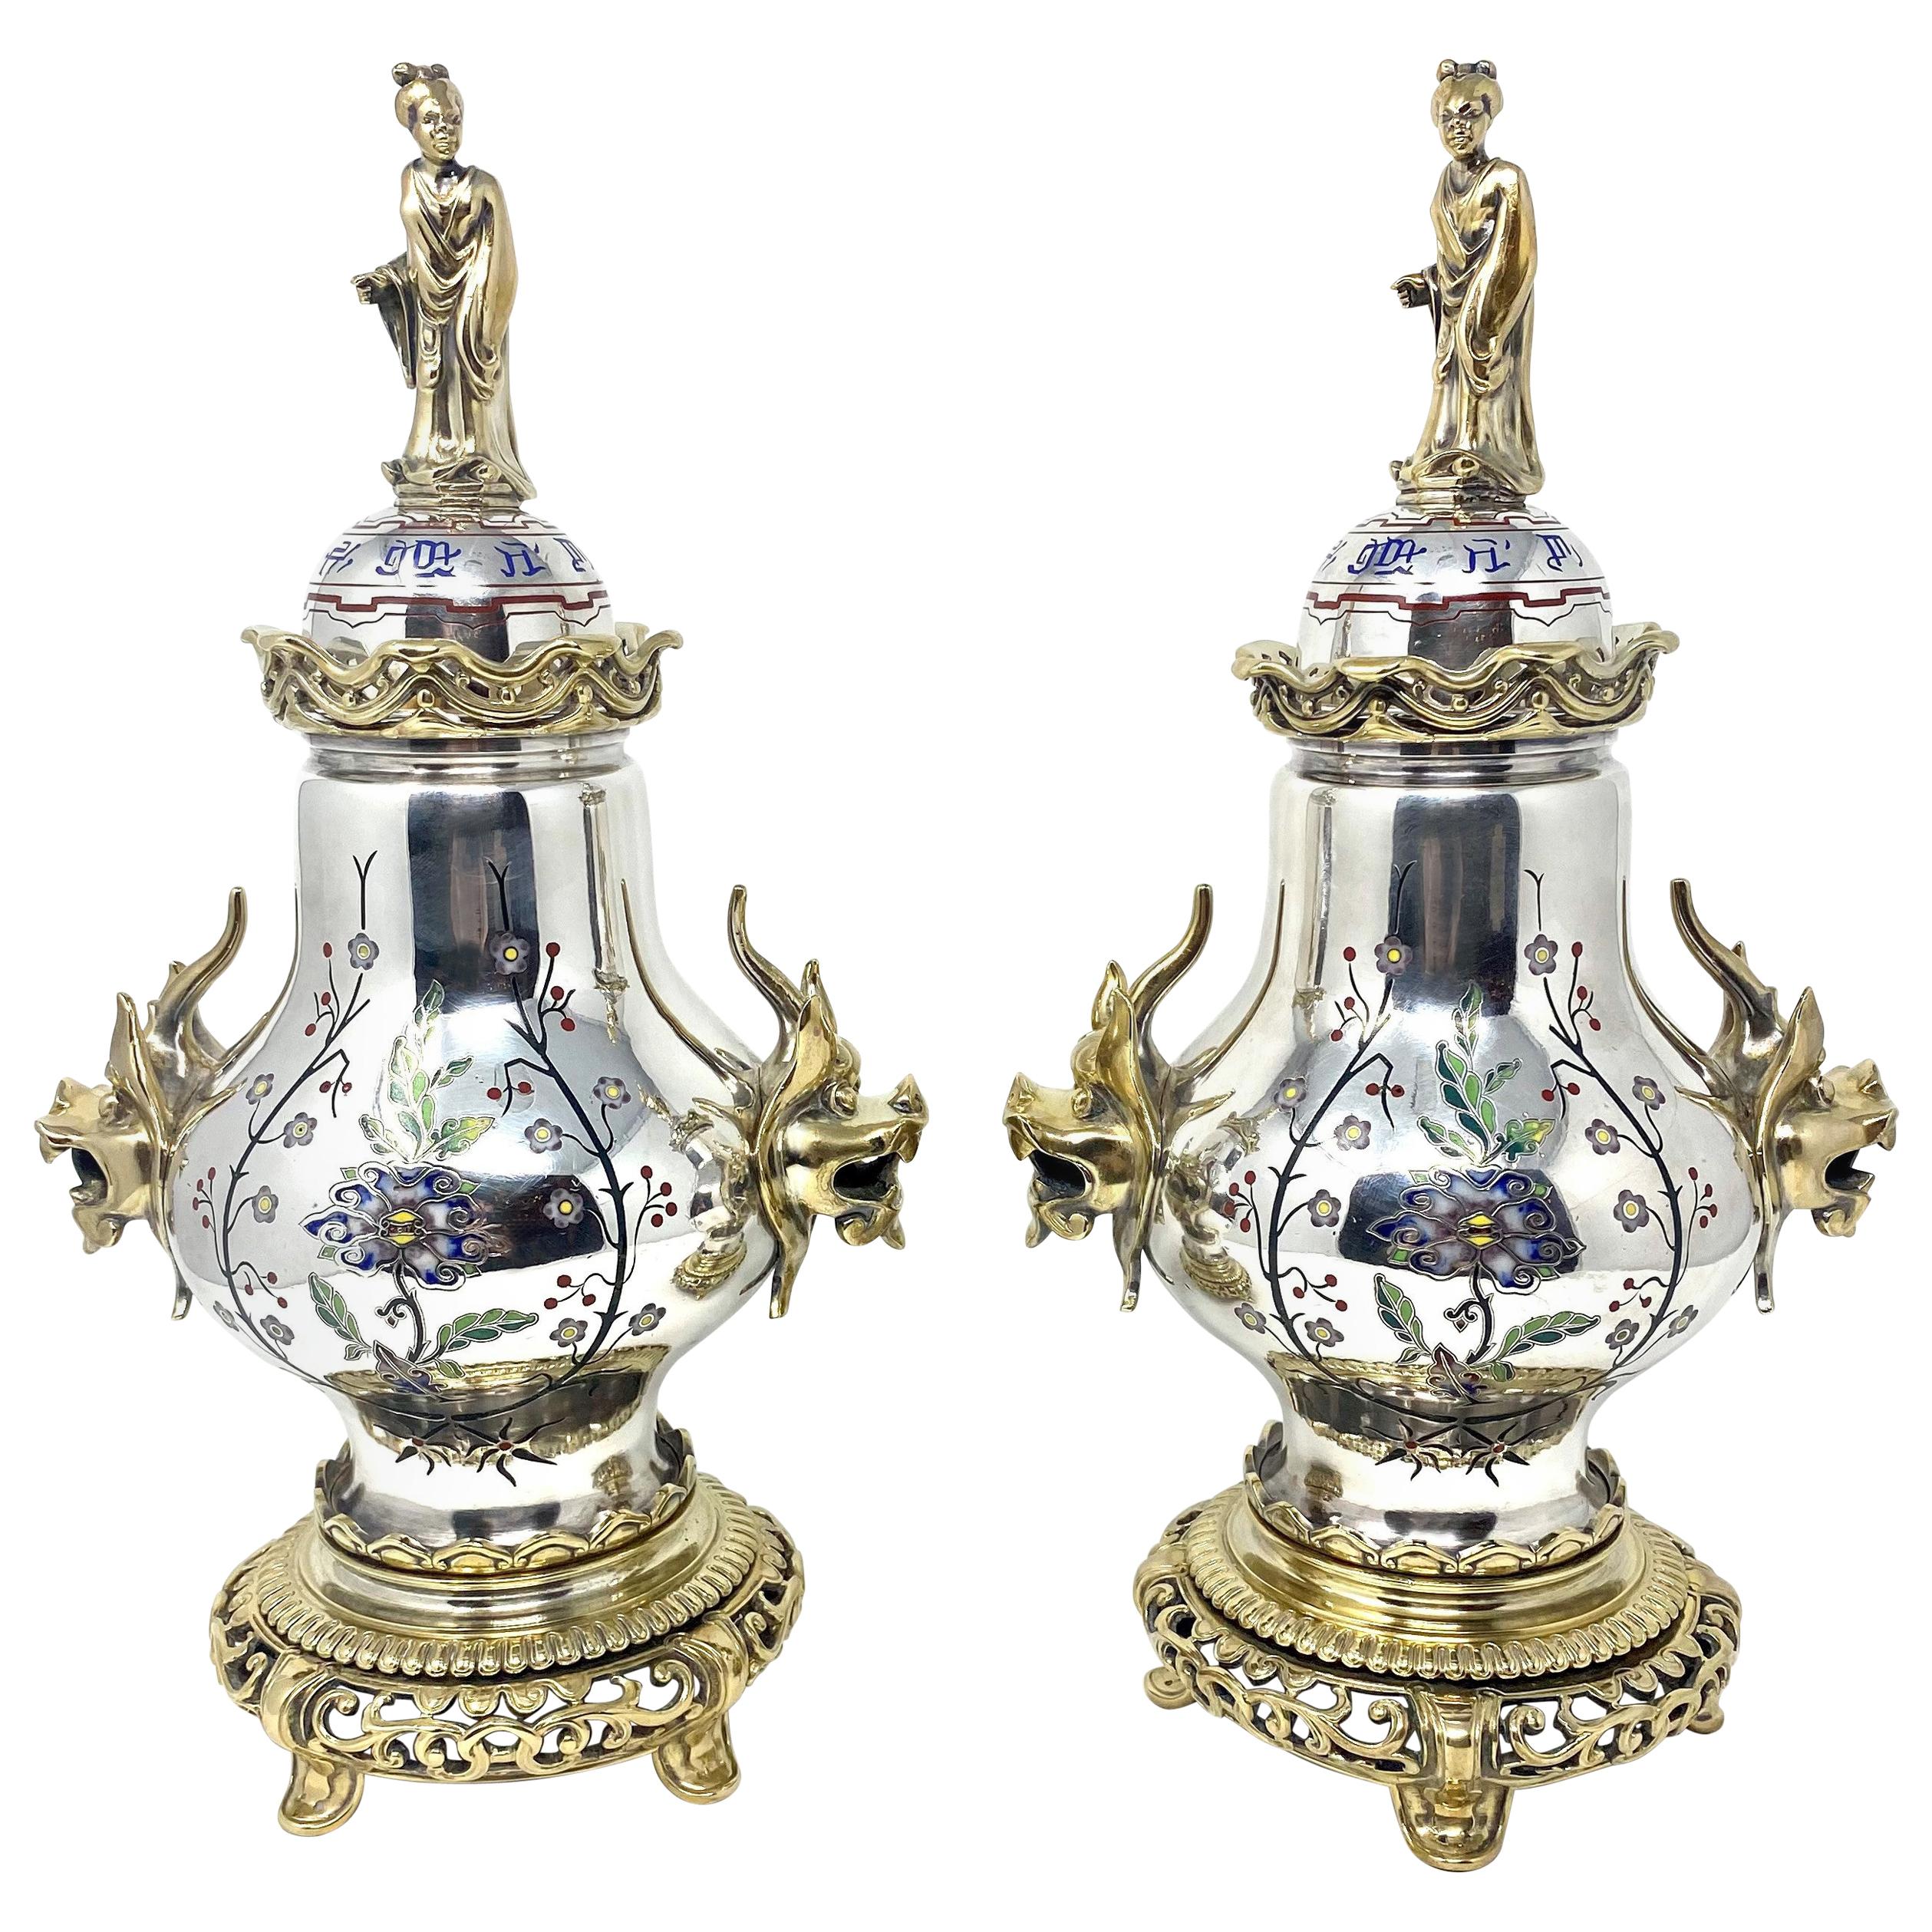 Pair of Antique 19th Century Silvered and Enameled Bronze Chinoiserie Urns For Sale